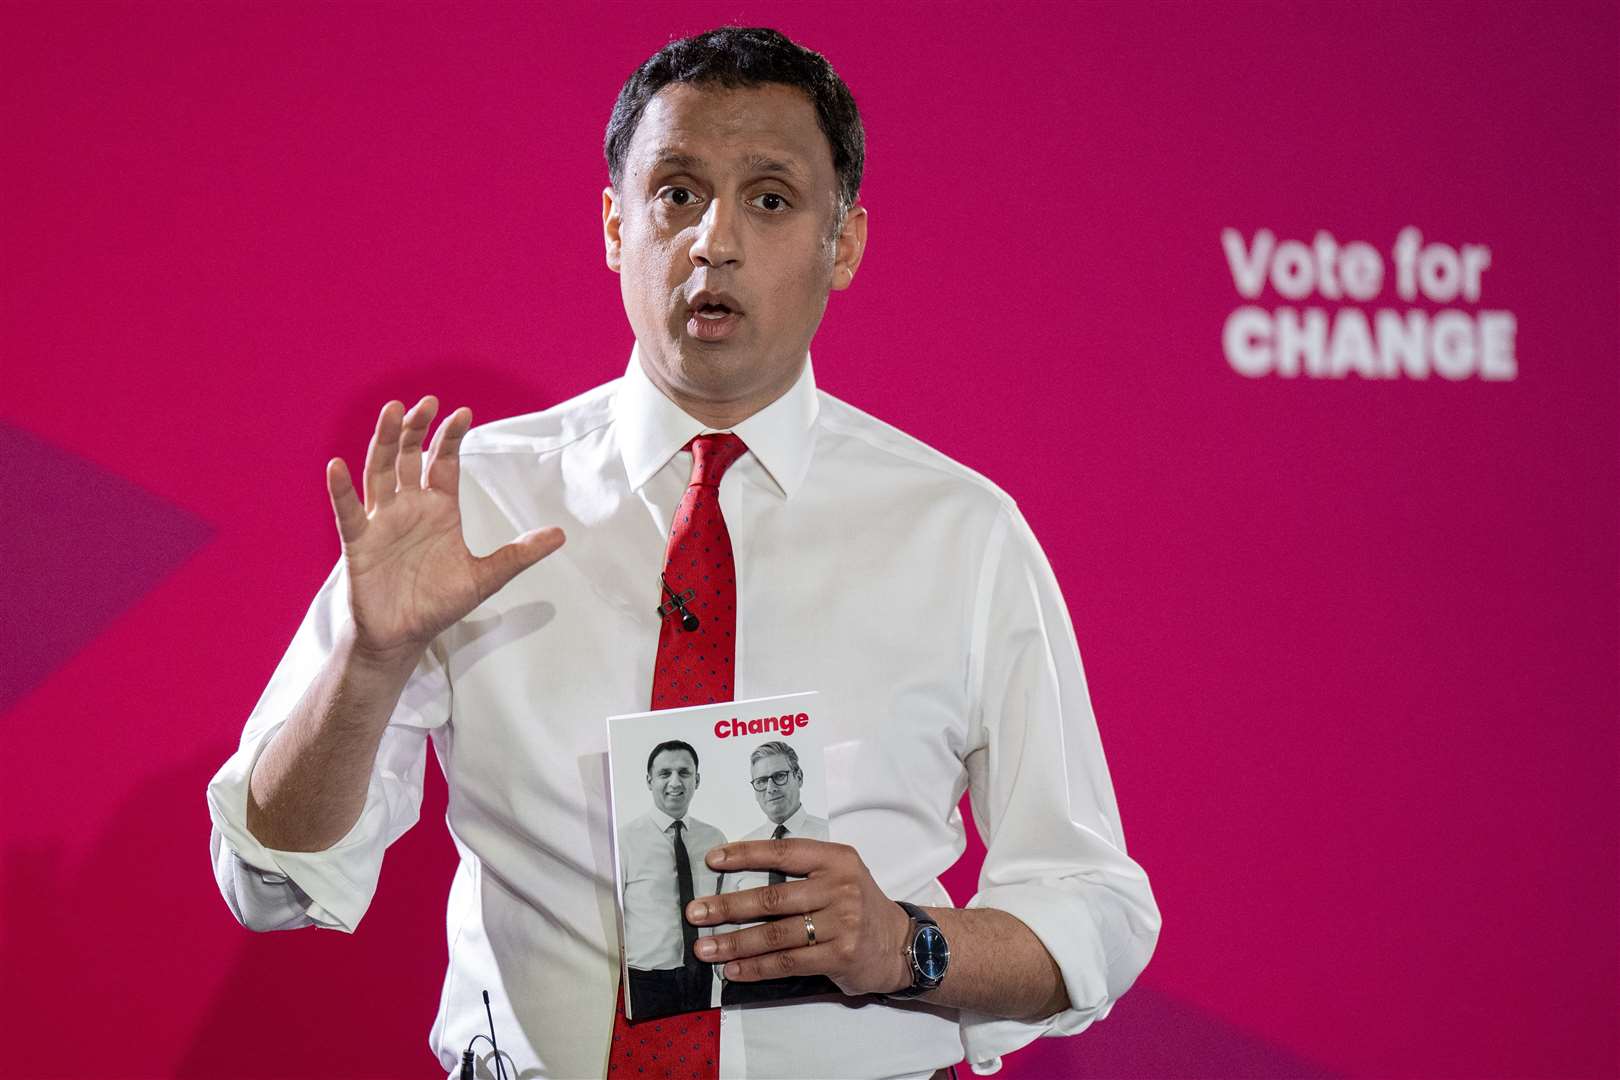 The campaign between the SNP and Scottish Labour under Anas Sarwar, pictured, is one of ‘genuine, competing visions of the future’, Swinney will say (Jane Barlow/PA)